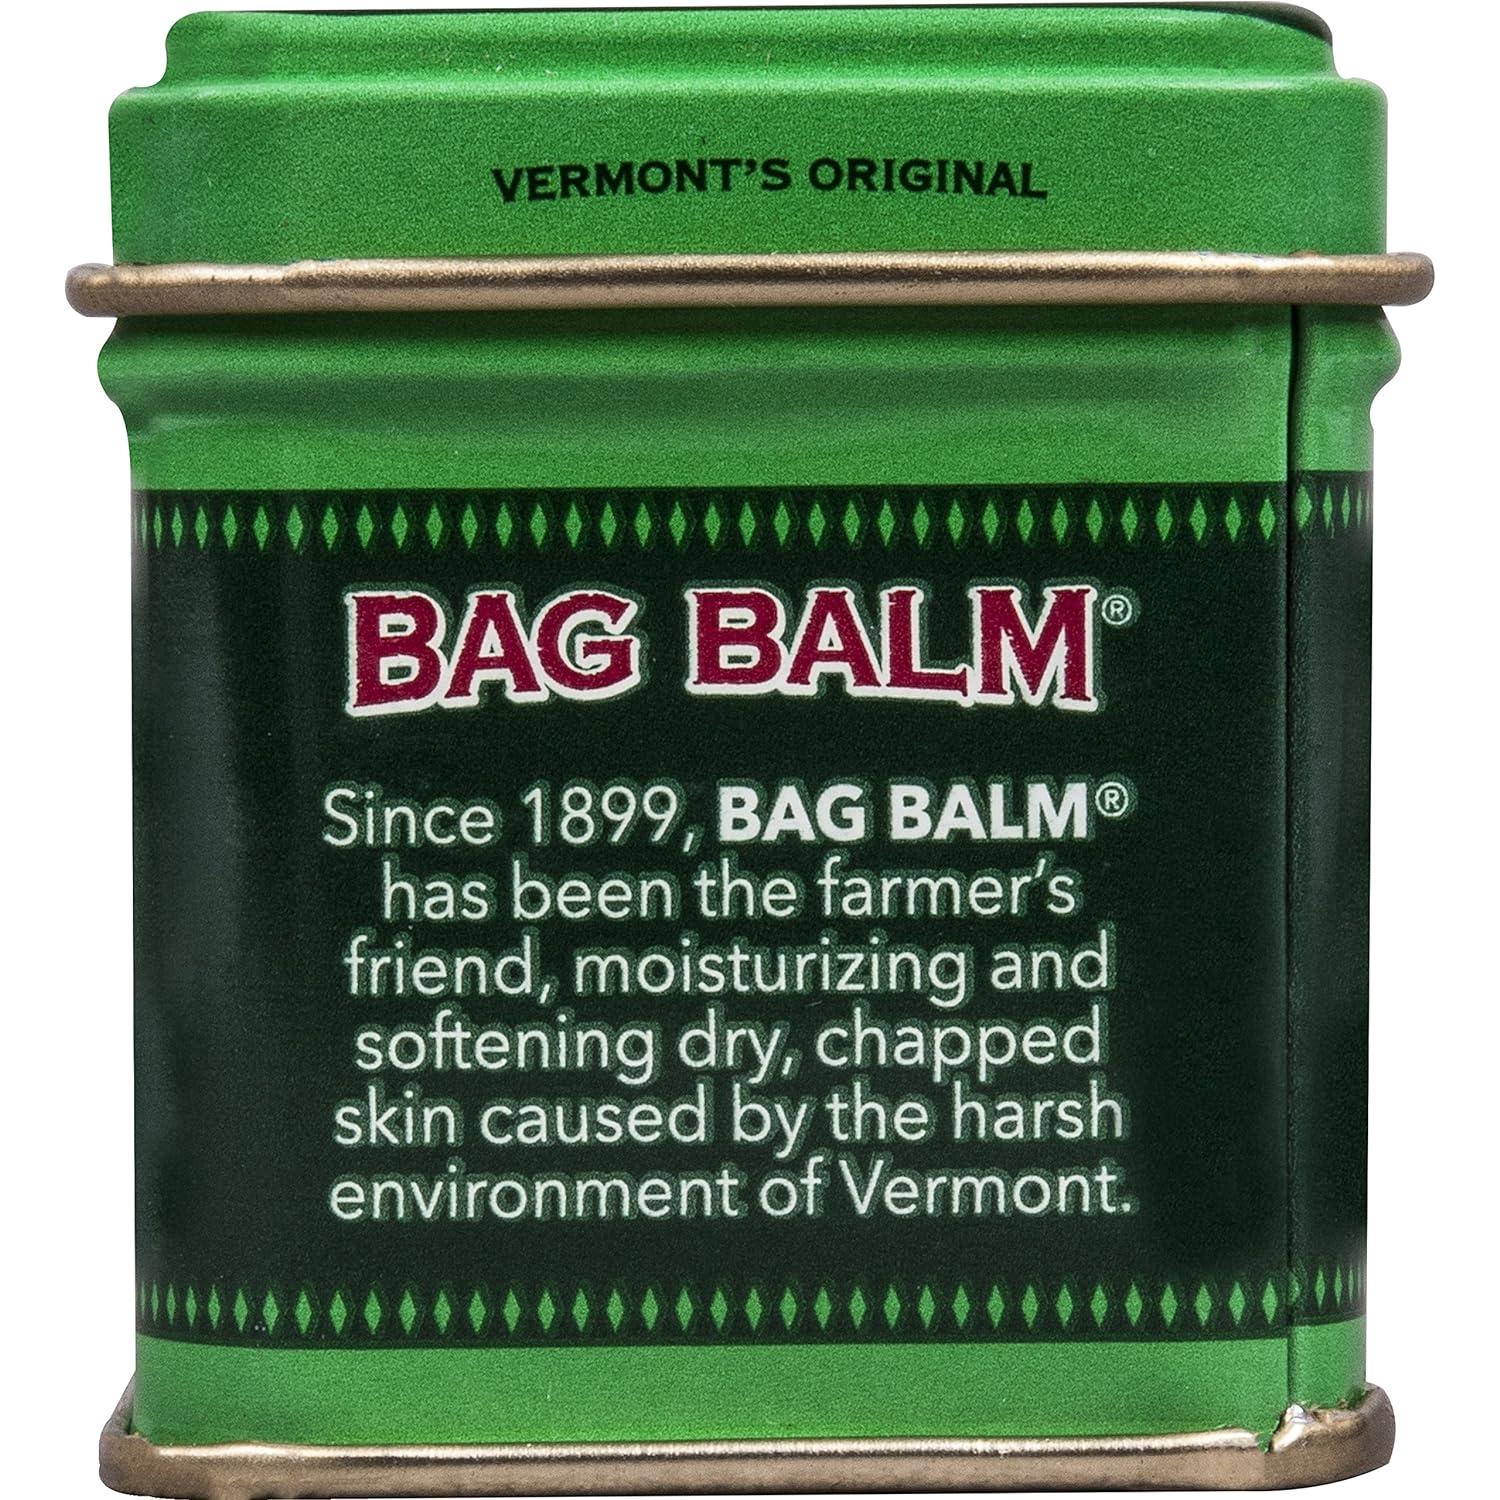 Bag Balm Skin Moisturizer with Lanolin for Chapped Lips, Dry Skin and More  | 4oz Tin